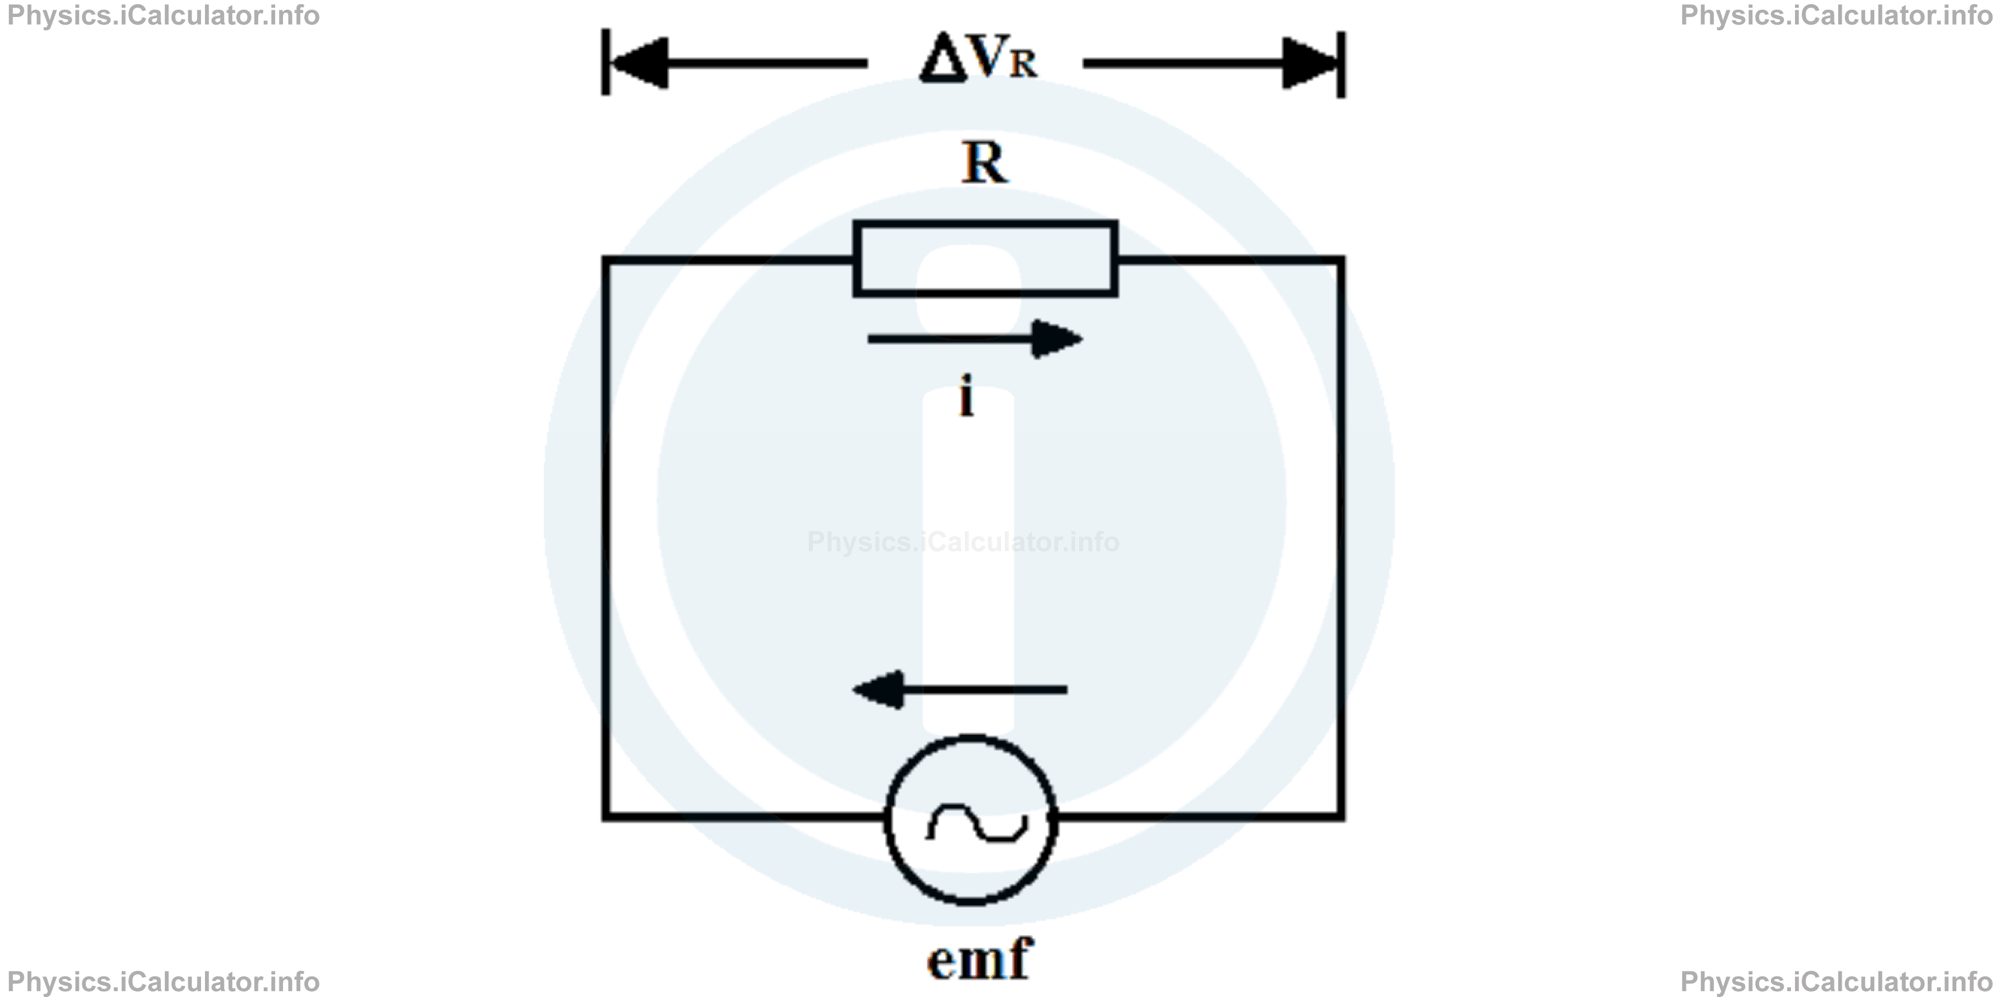 Physics Tutorials: This image provides visual information for the physics tutorial Introduction to RLC Circuits 